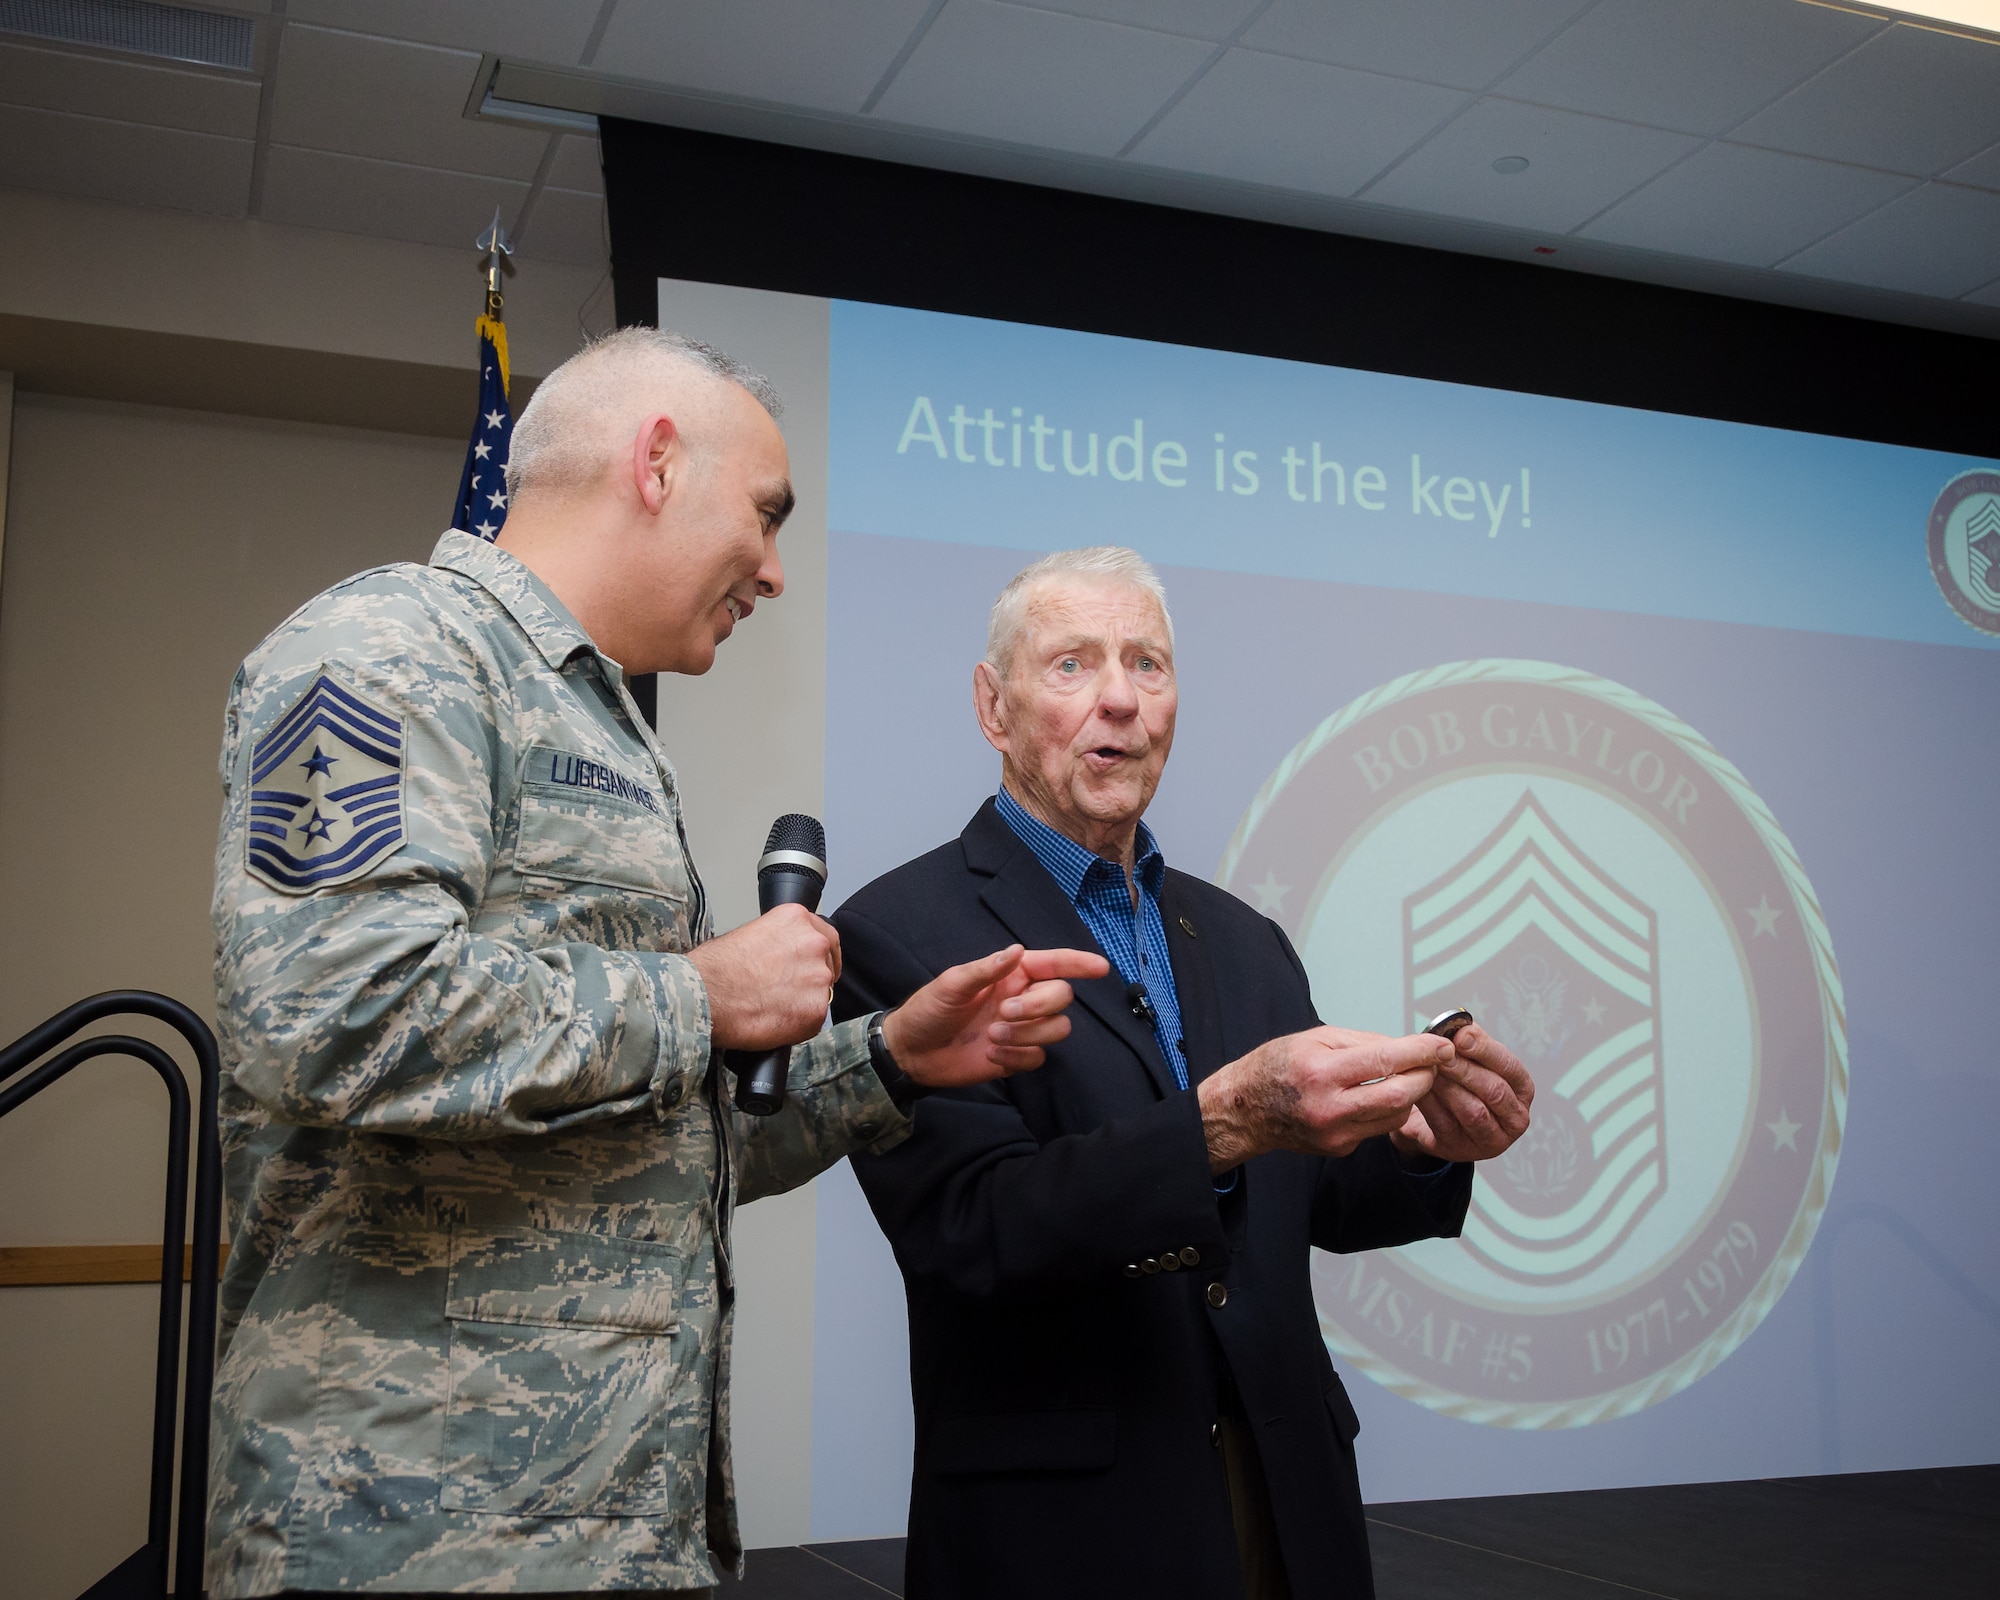 Chief Master Sgt. Jose A. LugoSantiago, command chief of the Air Force Installation and Mission Support Center, coins retired Chief Master Sgt. Robert Gaylor during his visit with Airmen at Joint Base San Antonio-Lackland, March 30, 2017. Gaylor was the fifth Chief Master Sergeant of the Air Force serving from 1977-1979. Now at age 86, Gaylor continues to visit Airmen across the Air Force. (U.S. Air Force photo by Malcolm McClendon)